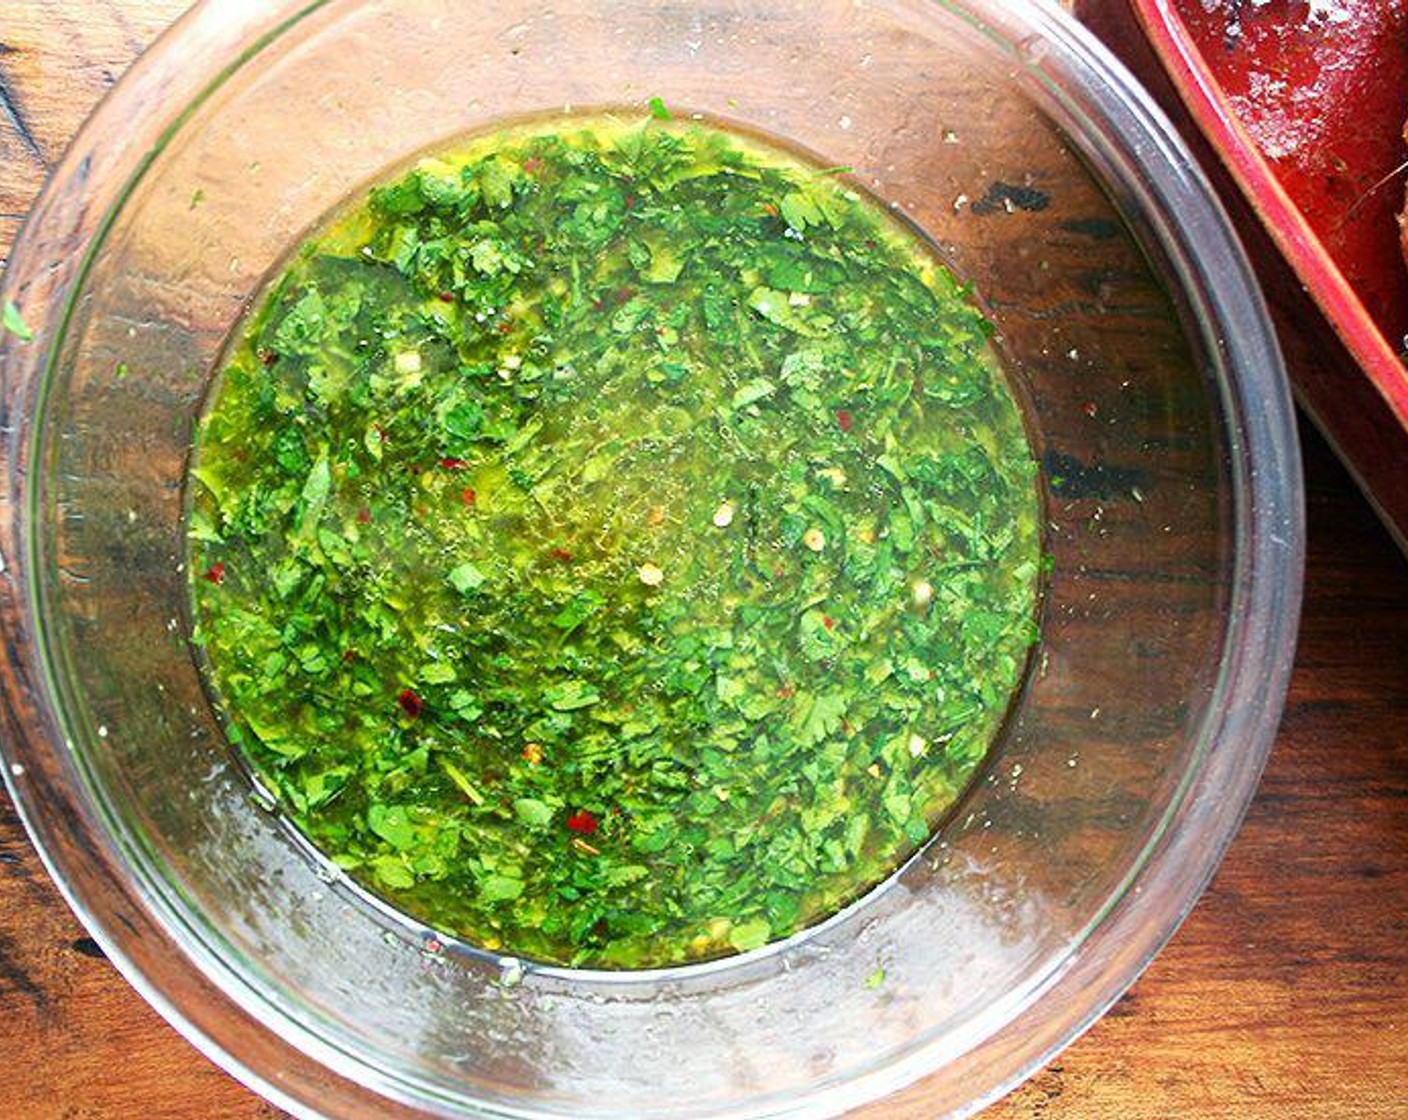 step 3 Combine Garlic (2 cloves), Kosher Salt (1 tsp), Freshly Ground Black Pepper (to taste), Crushed Red Pepper Flakes (1/4 tsp), Fresh Parsley (1/2 cup), White Wine (2/3 cup), Chicken Stock (1/2 cup), Olive Oil (1/4 cup), zest and juice from Lemon (1) in a bowl and whisk to blend.